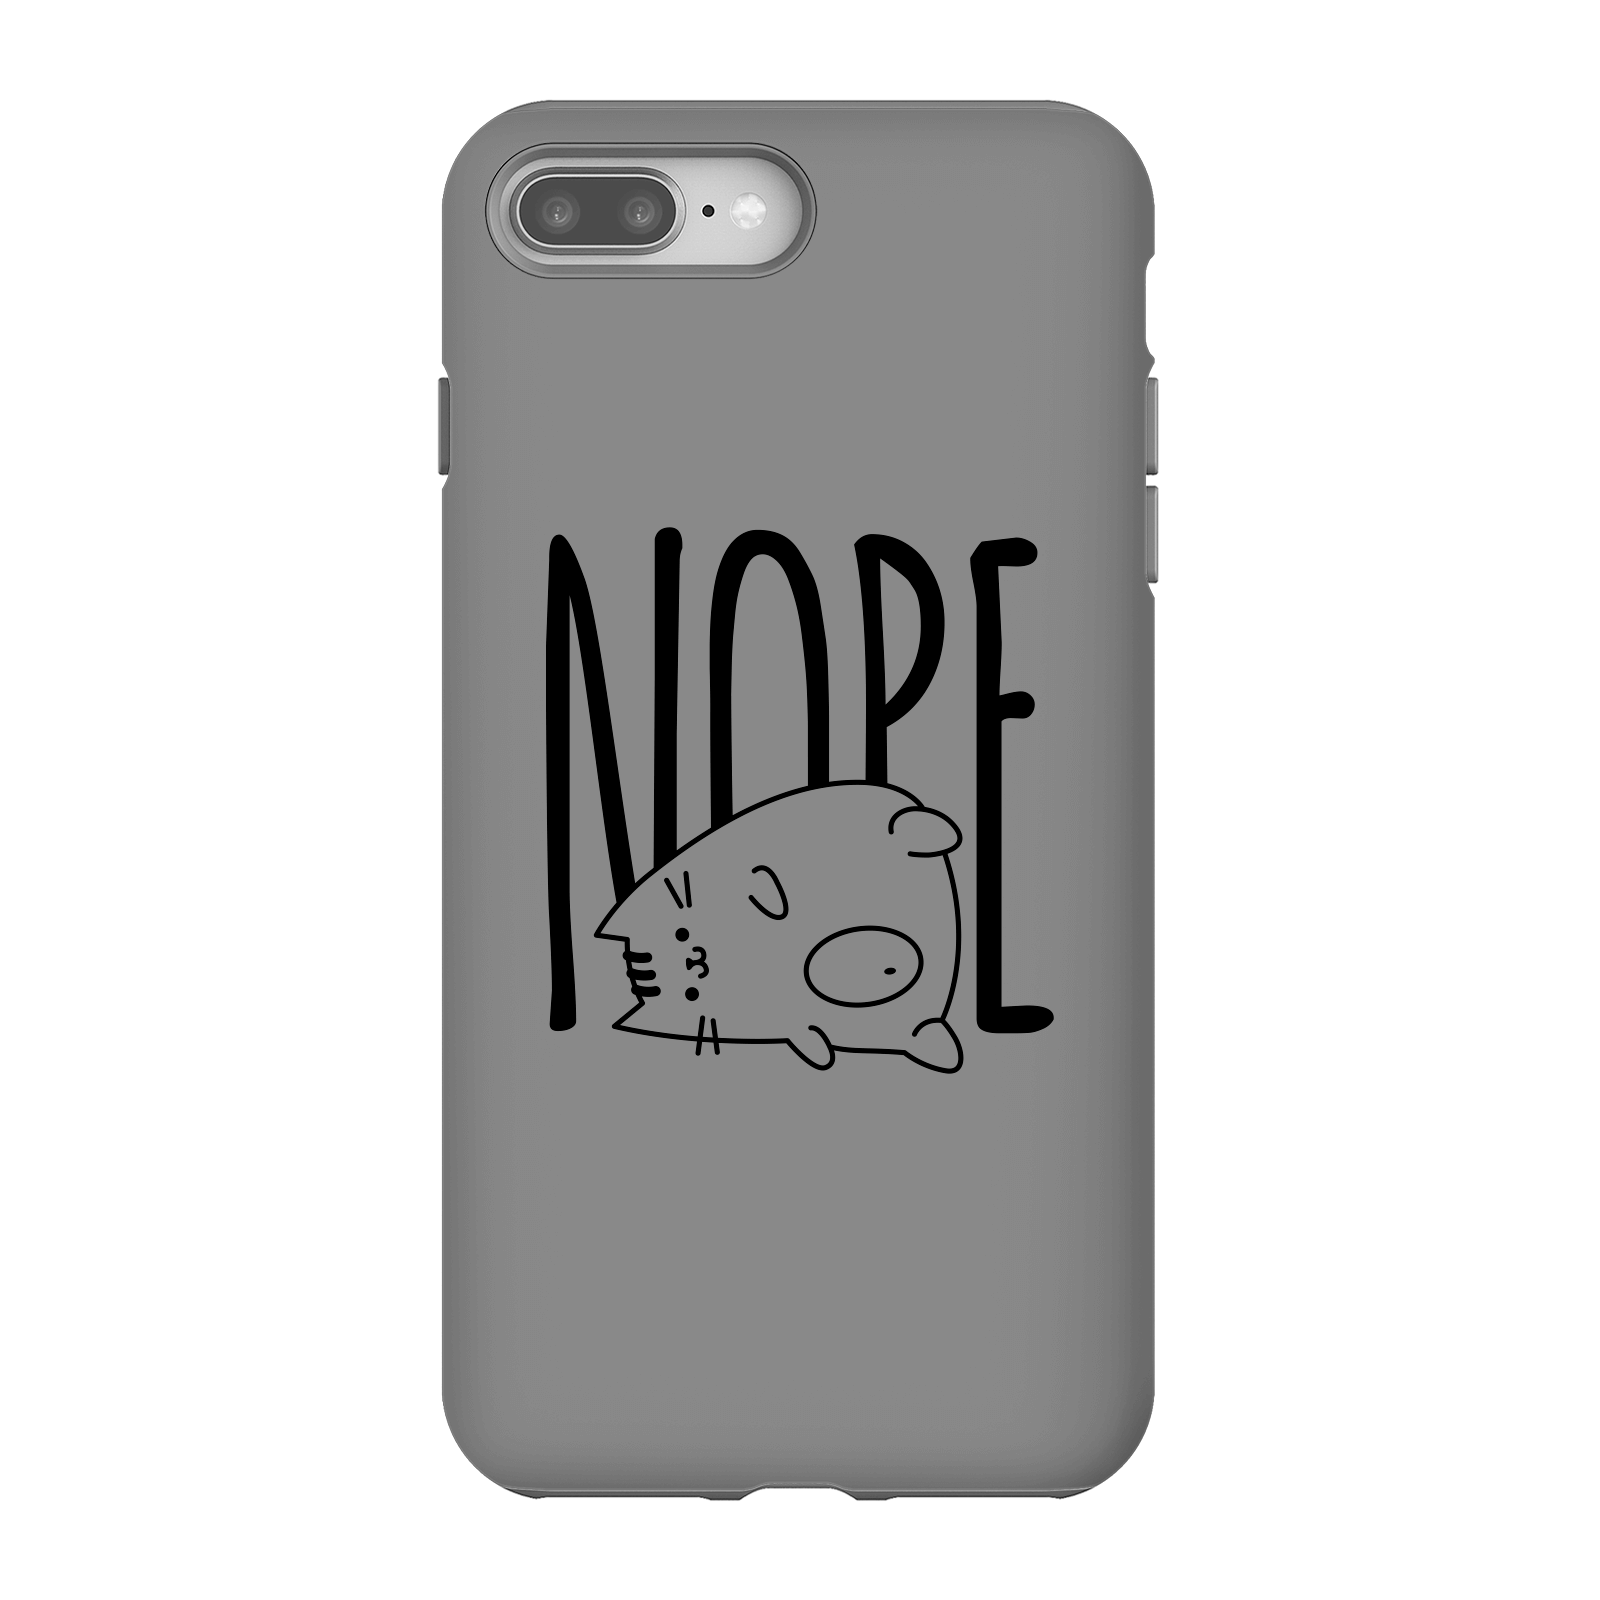 Nope Phone Case for iPhone and Android - iPhone 8 Plus - Tough Case - Gloss